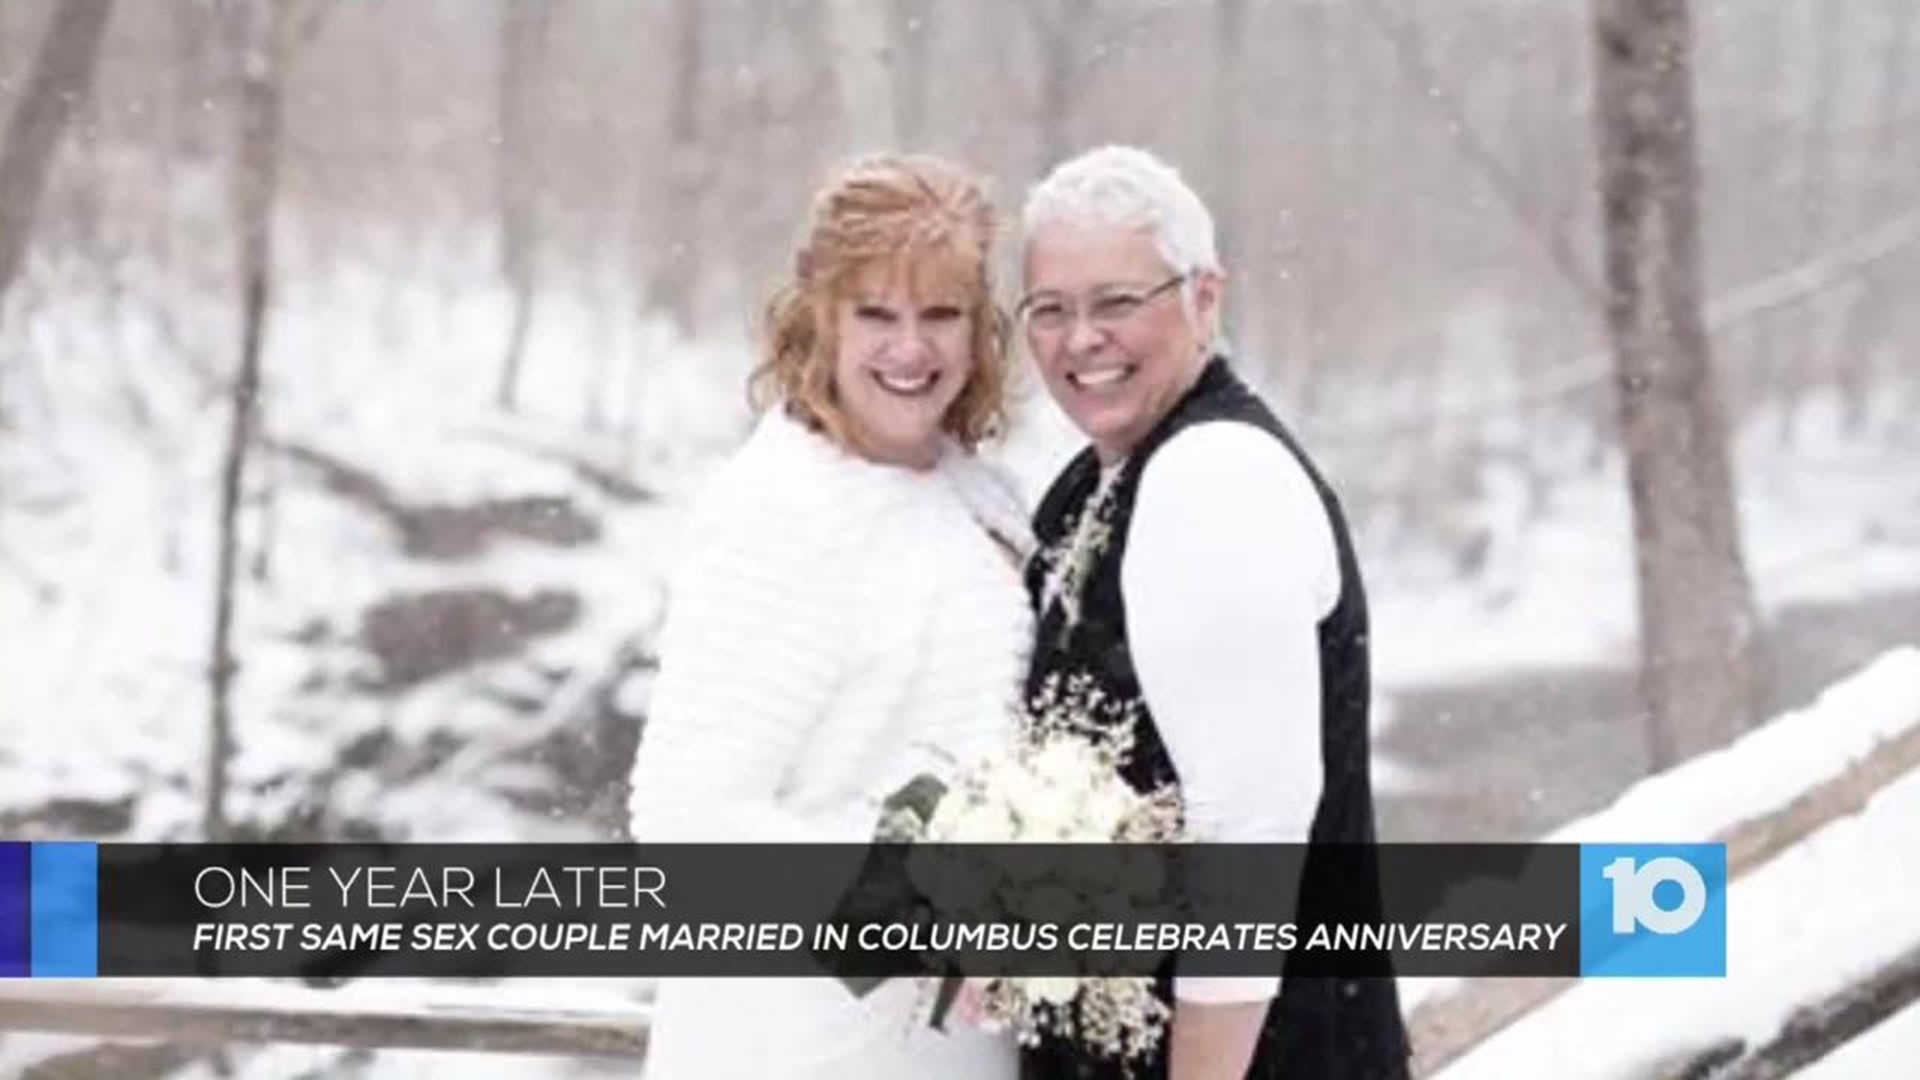 First same-sex couple married in Columbus celebrates anniversary 10tv